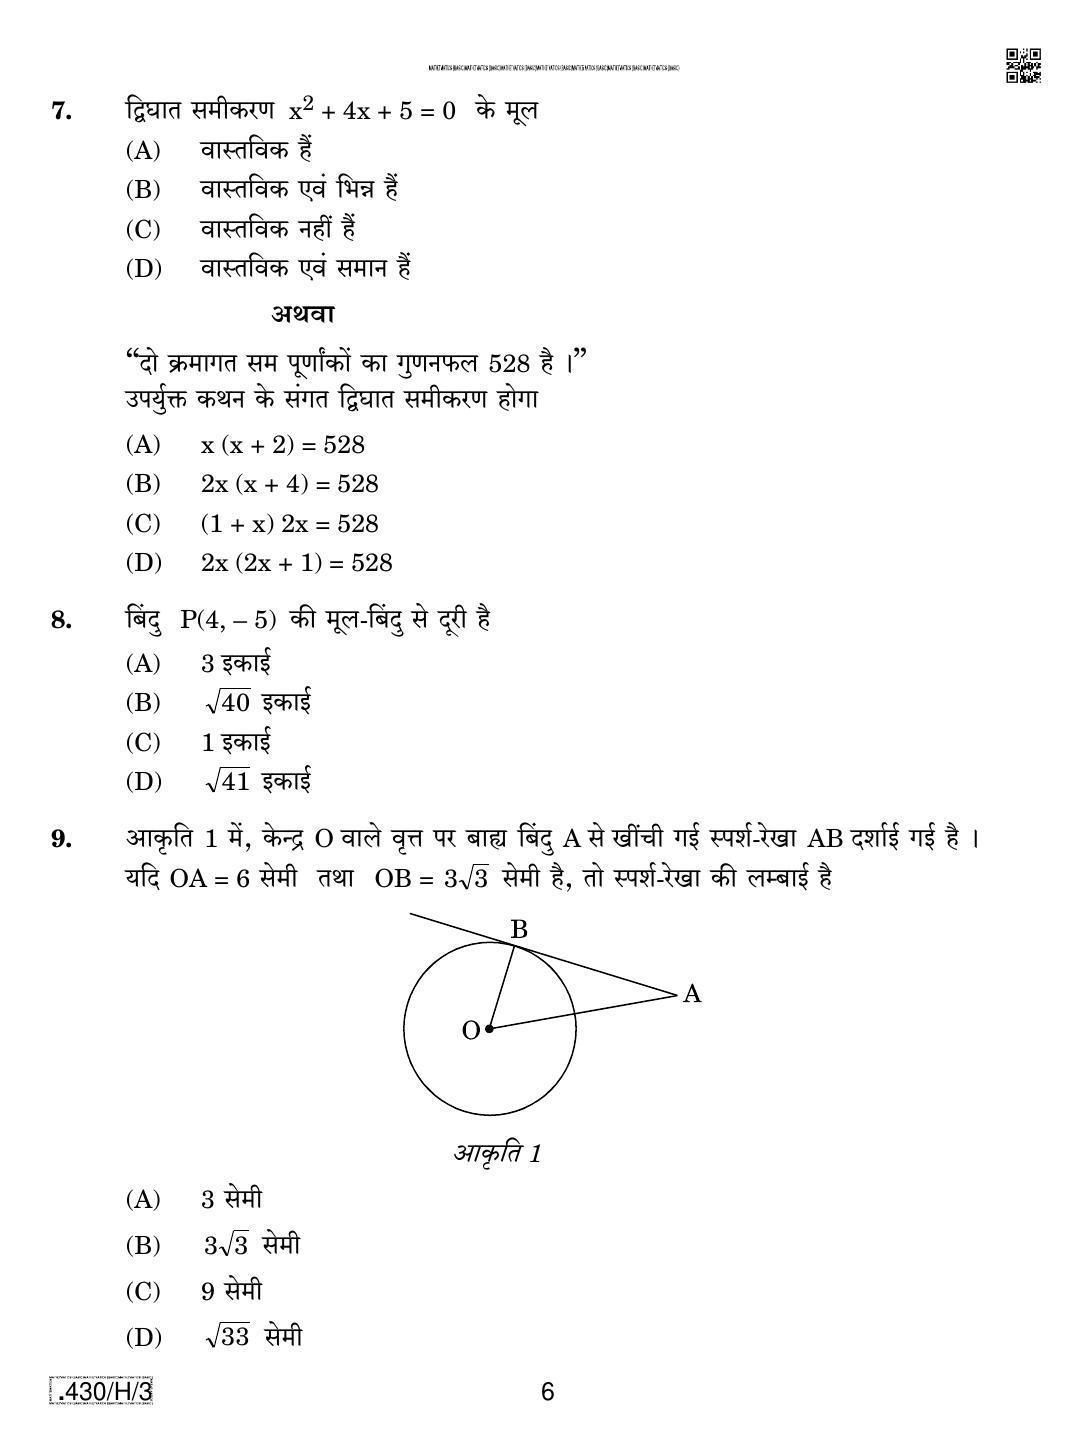 CBSE Class 10 430-C-3 - Maths (Basic) 2020 Compartment Question Paper - Page 6